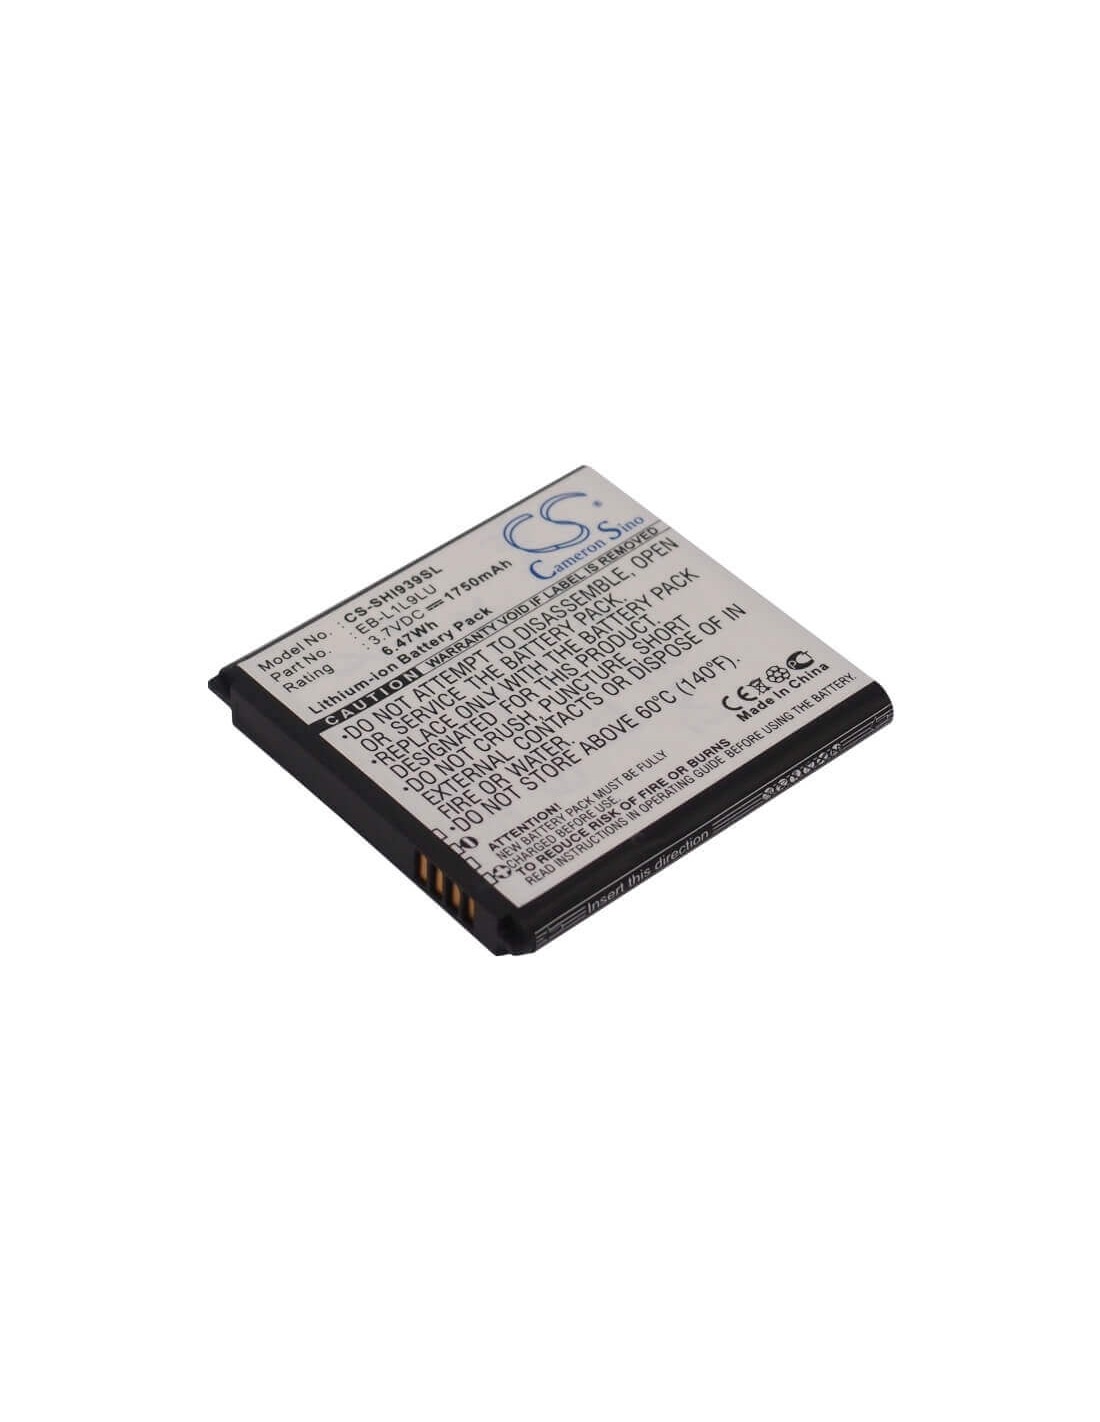 Battery for Samsung SCH-I939D, Galaxy S3 Duos 3.7V, 1750mAh - 6.48Wh